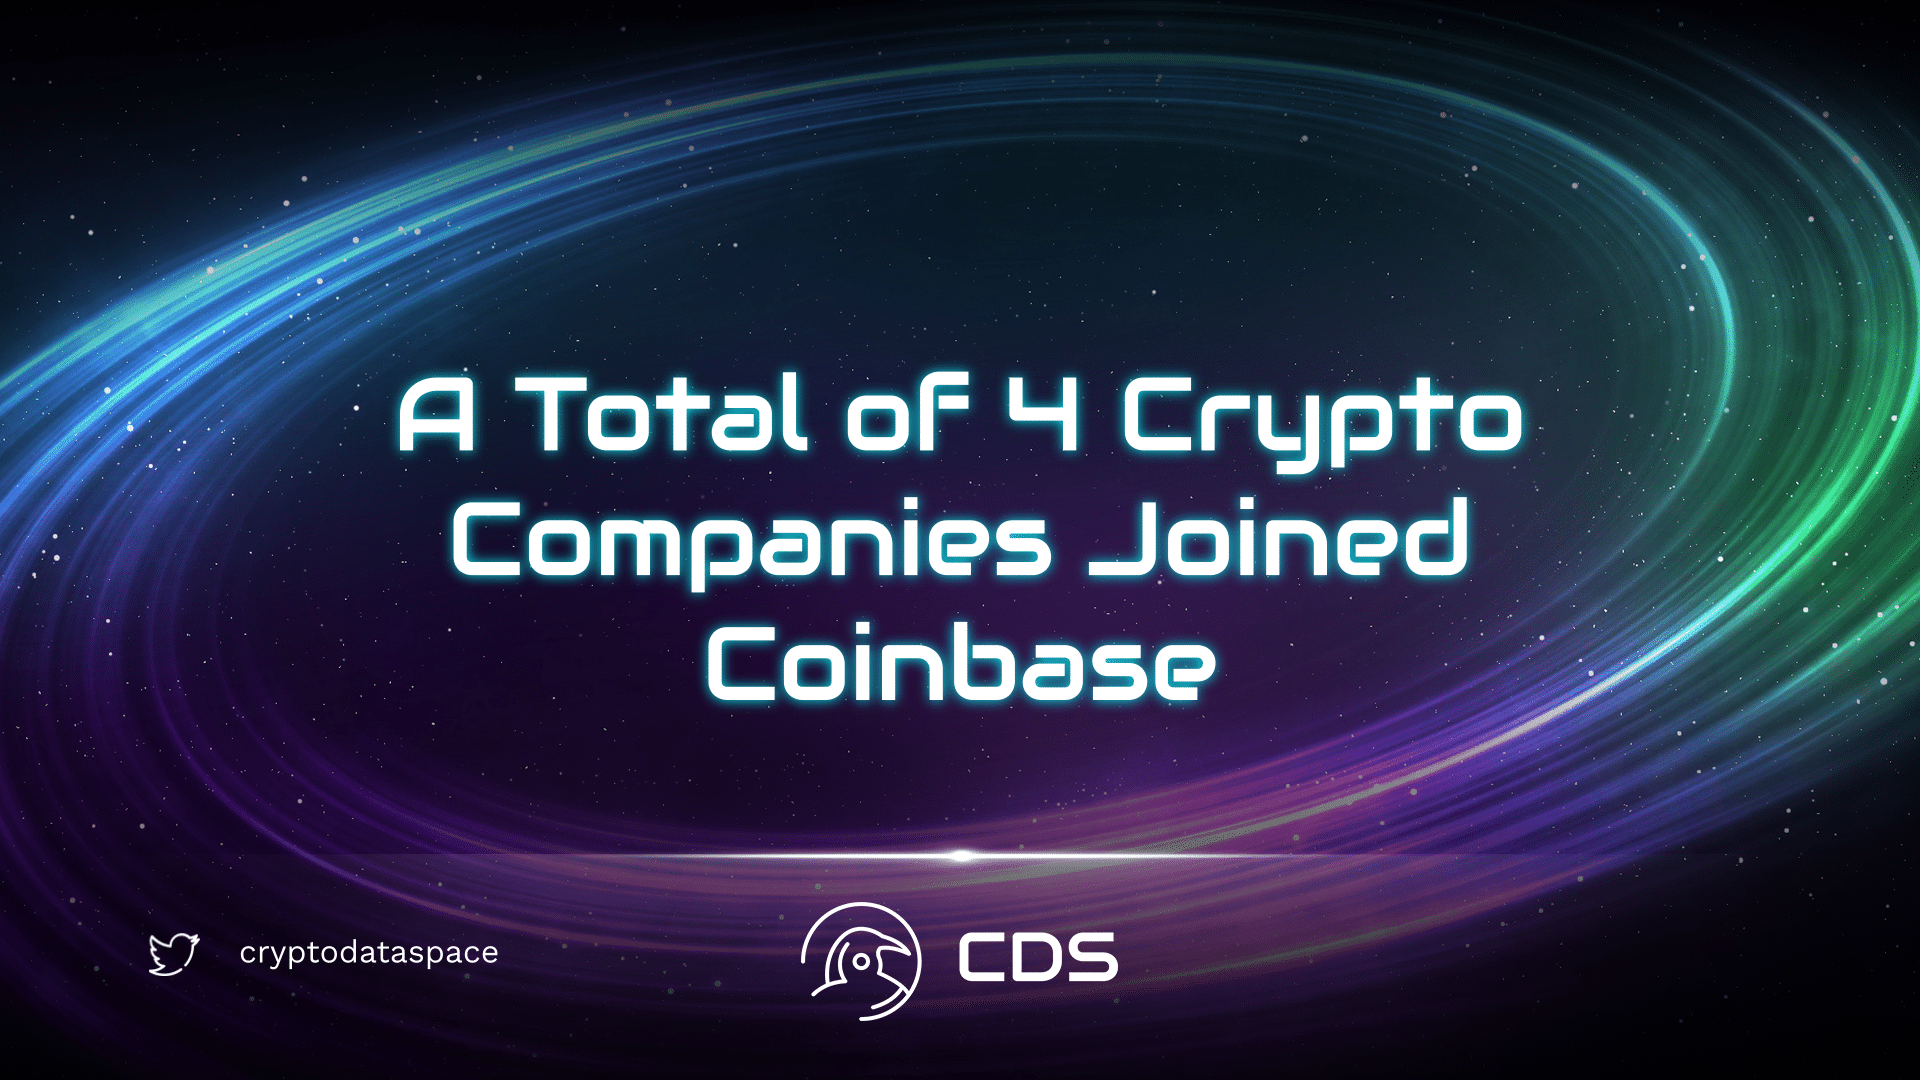 A Total of 4 Crypto Companies Joined Coinbase